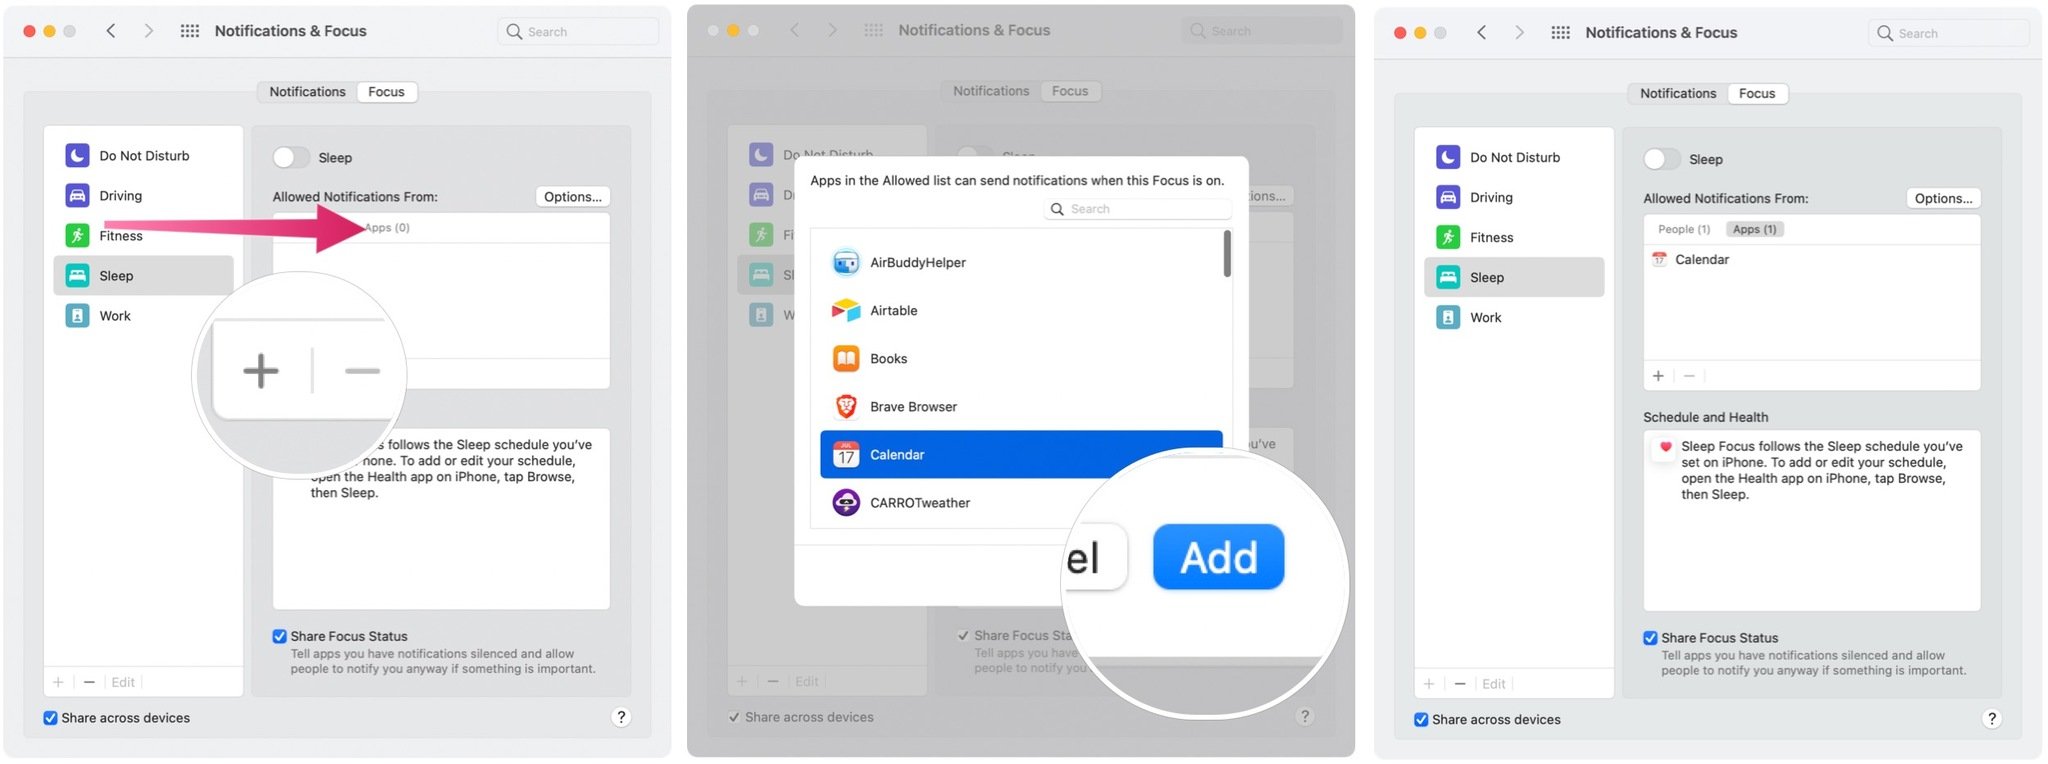 To adjust your app notification settings, choose the Focus group you wish to change, then highlight Apps under the Allowed Notifications From section. Click the + then highlight the installed app you wish to add. Select the Add button. "